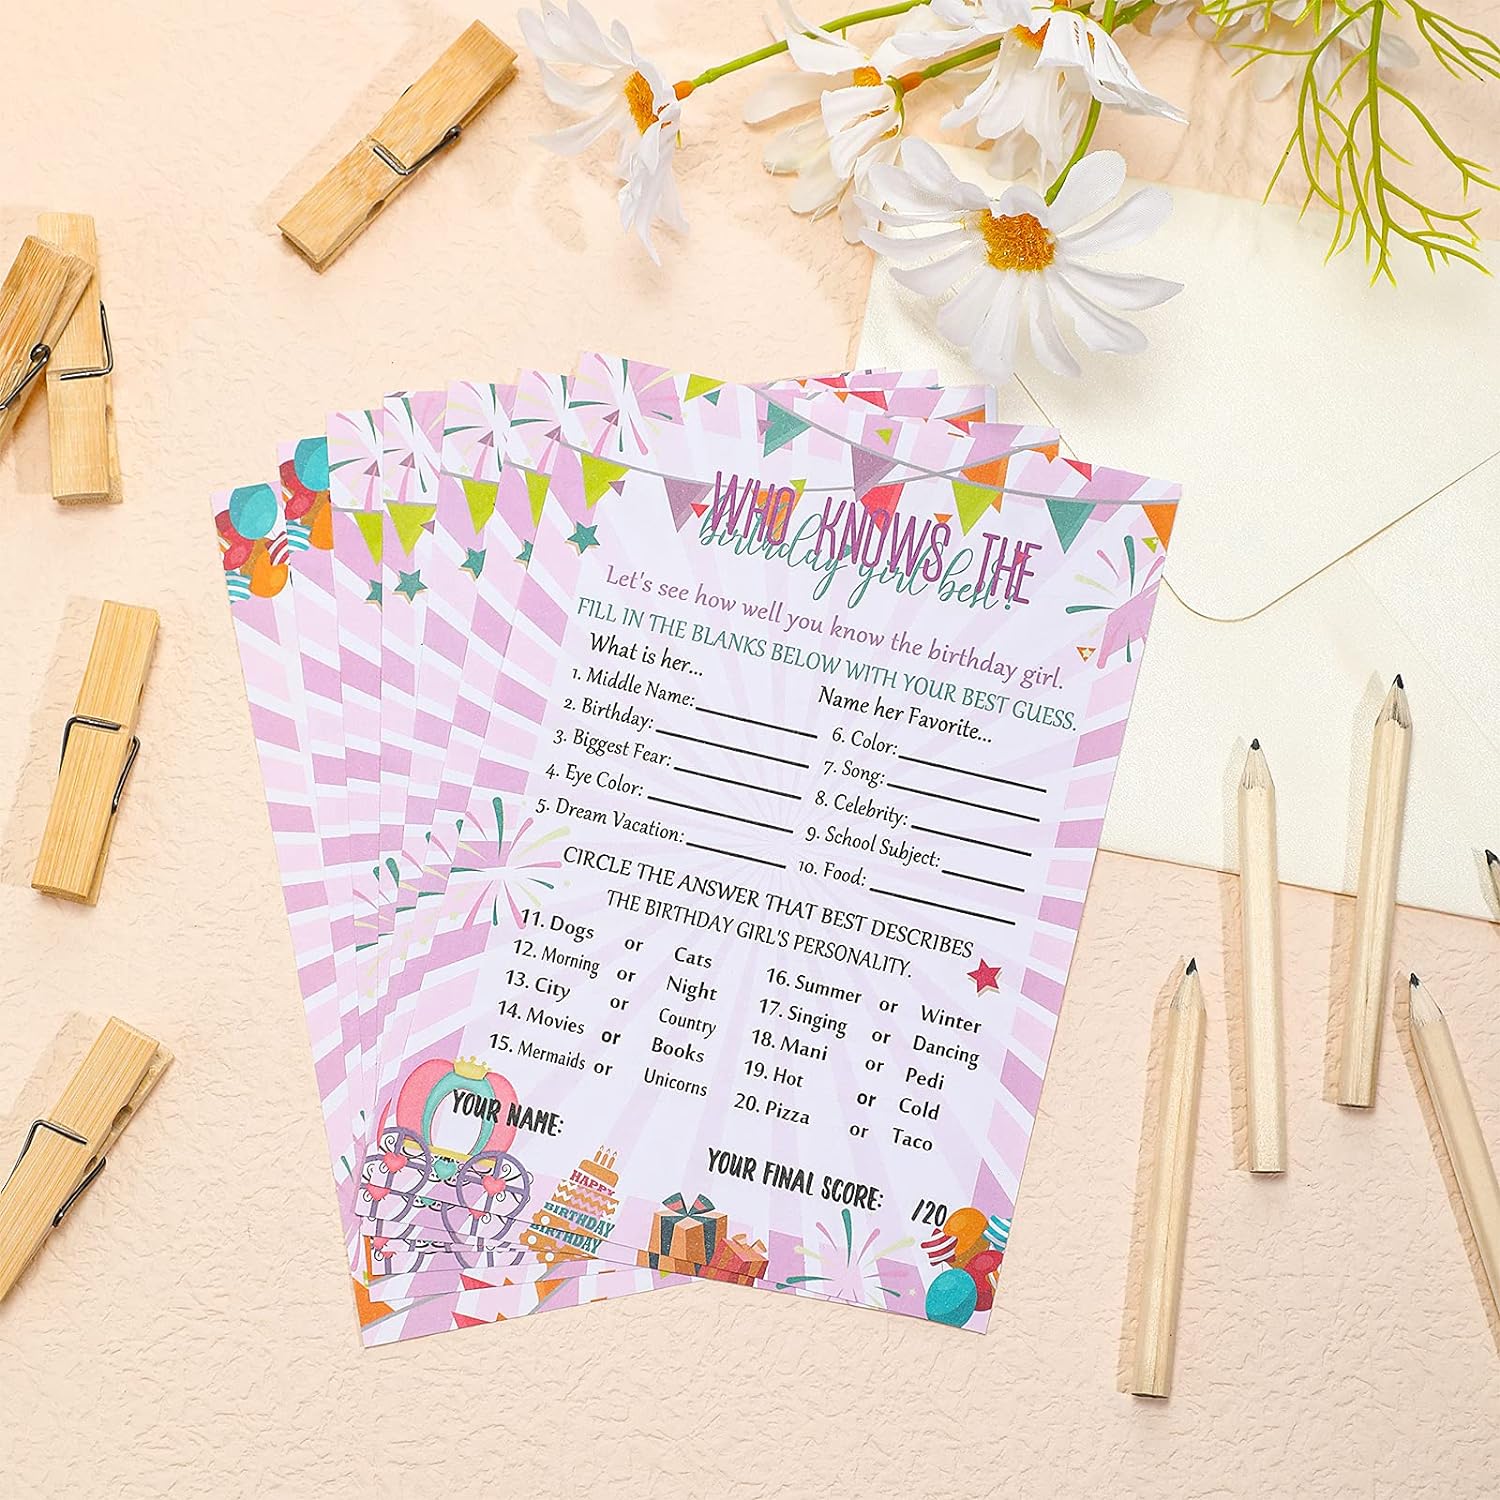 50 Pcs Birthday Party Activity Game Card Set with 20 Pcs Wood Pencils